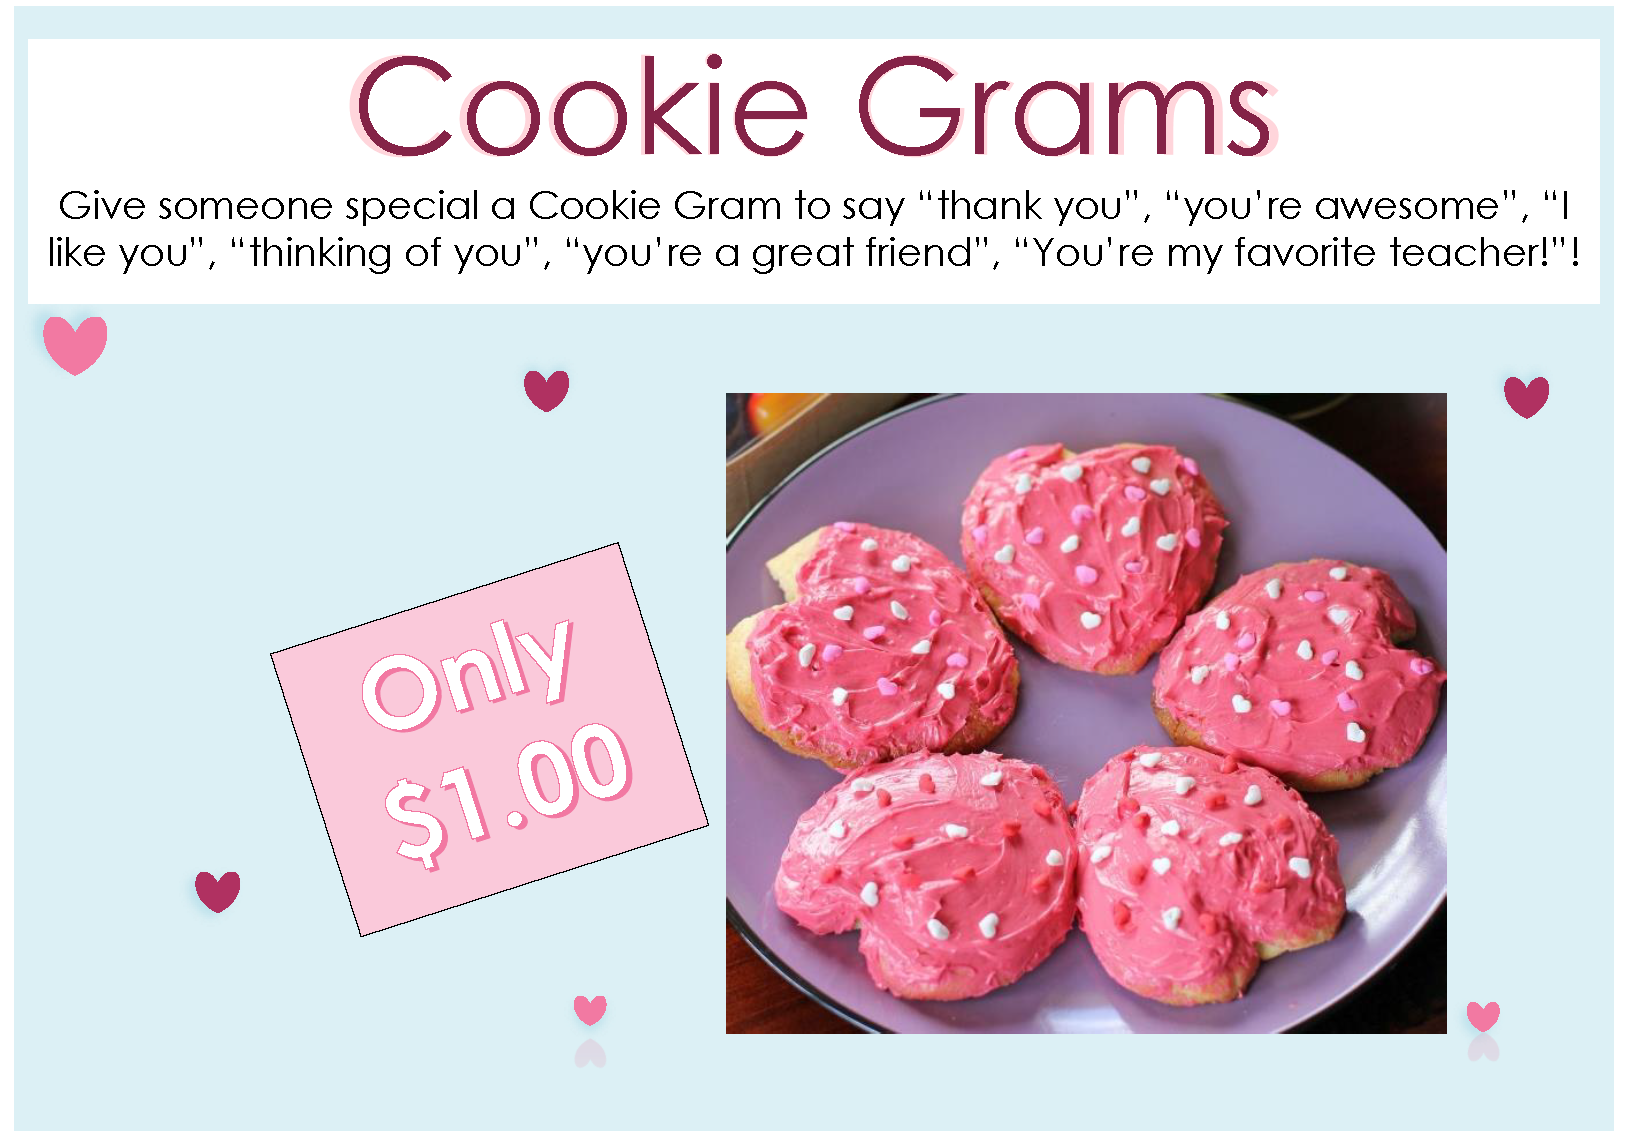 Cookie Grams for sale. Delivered on Valentines Day. (JAN 30 - FEB 13)